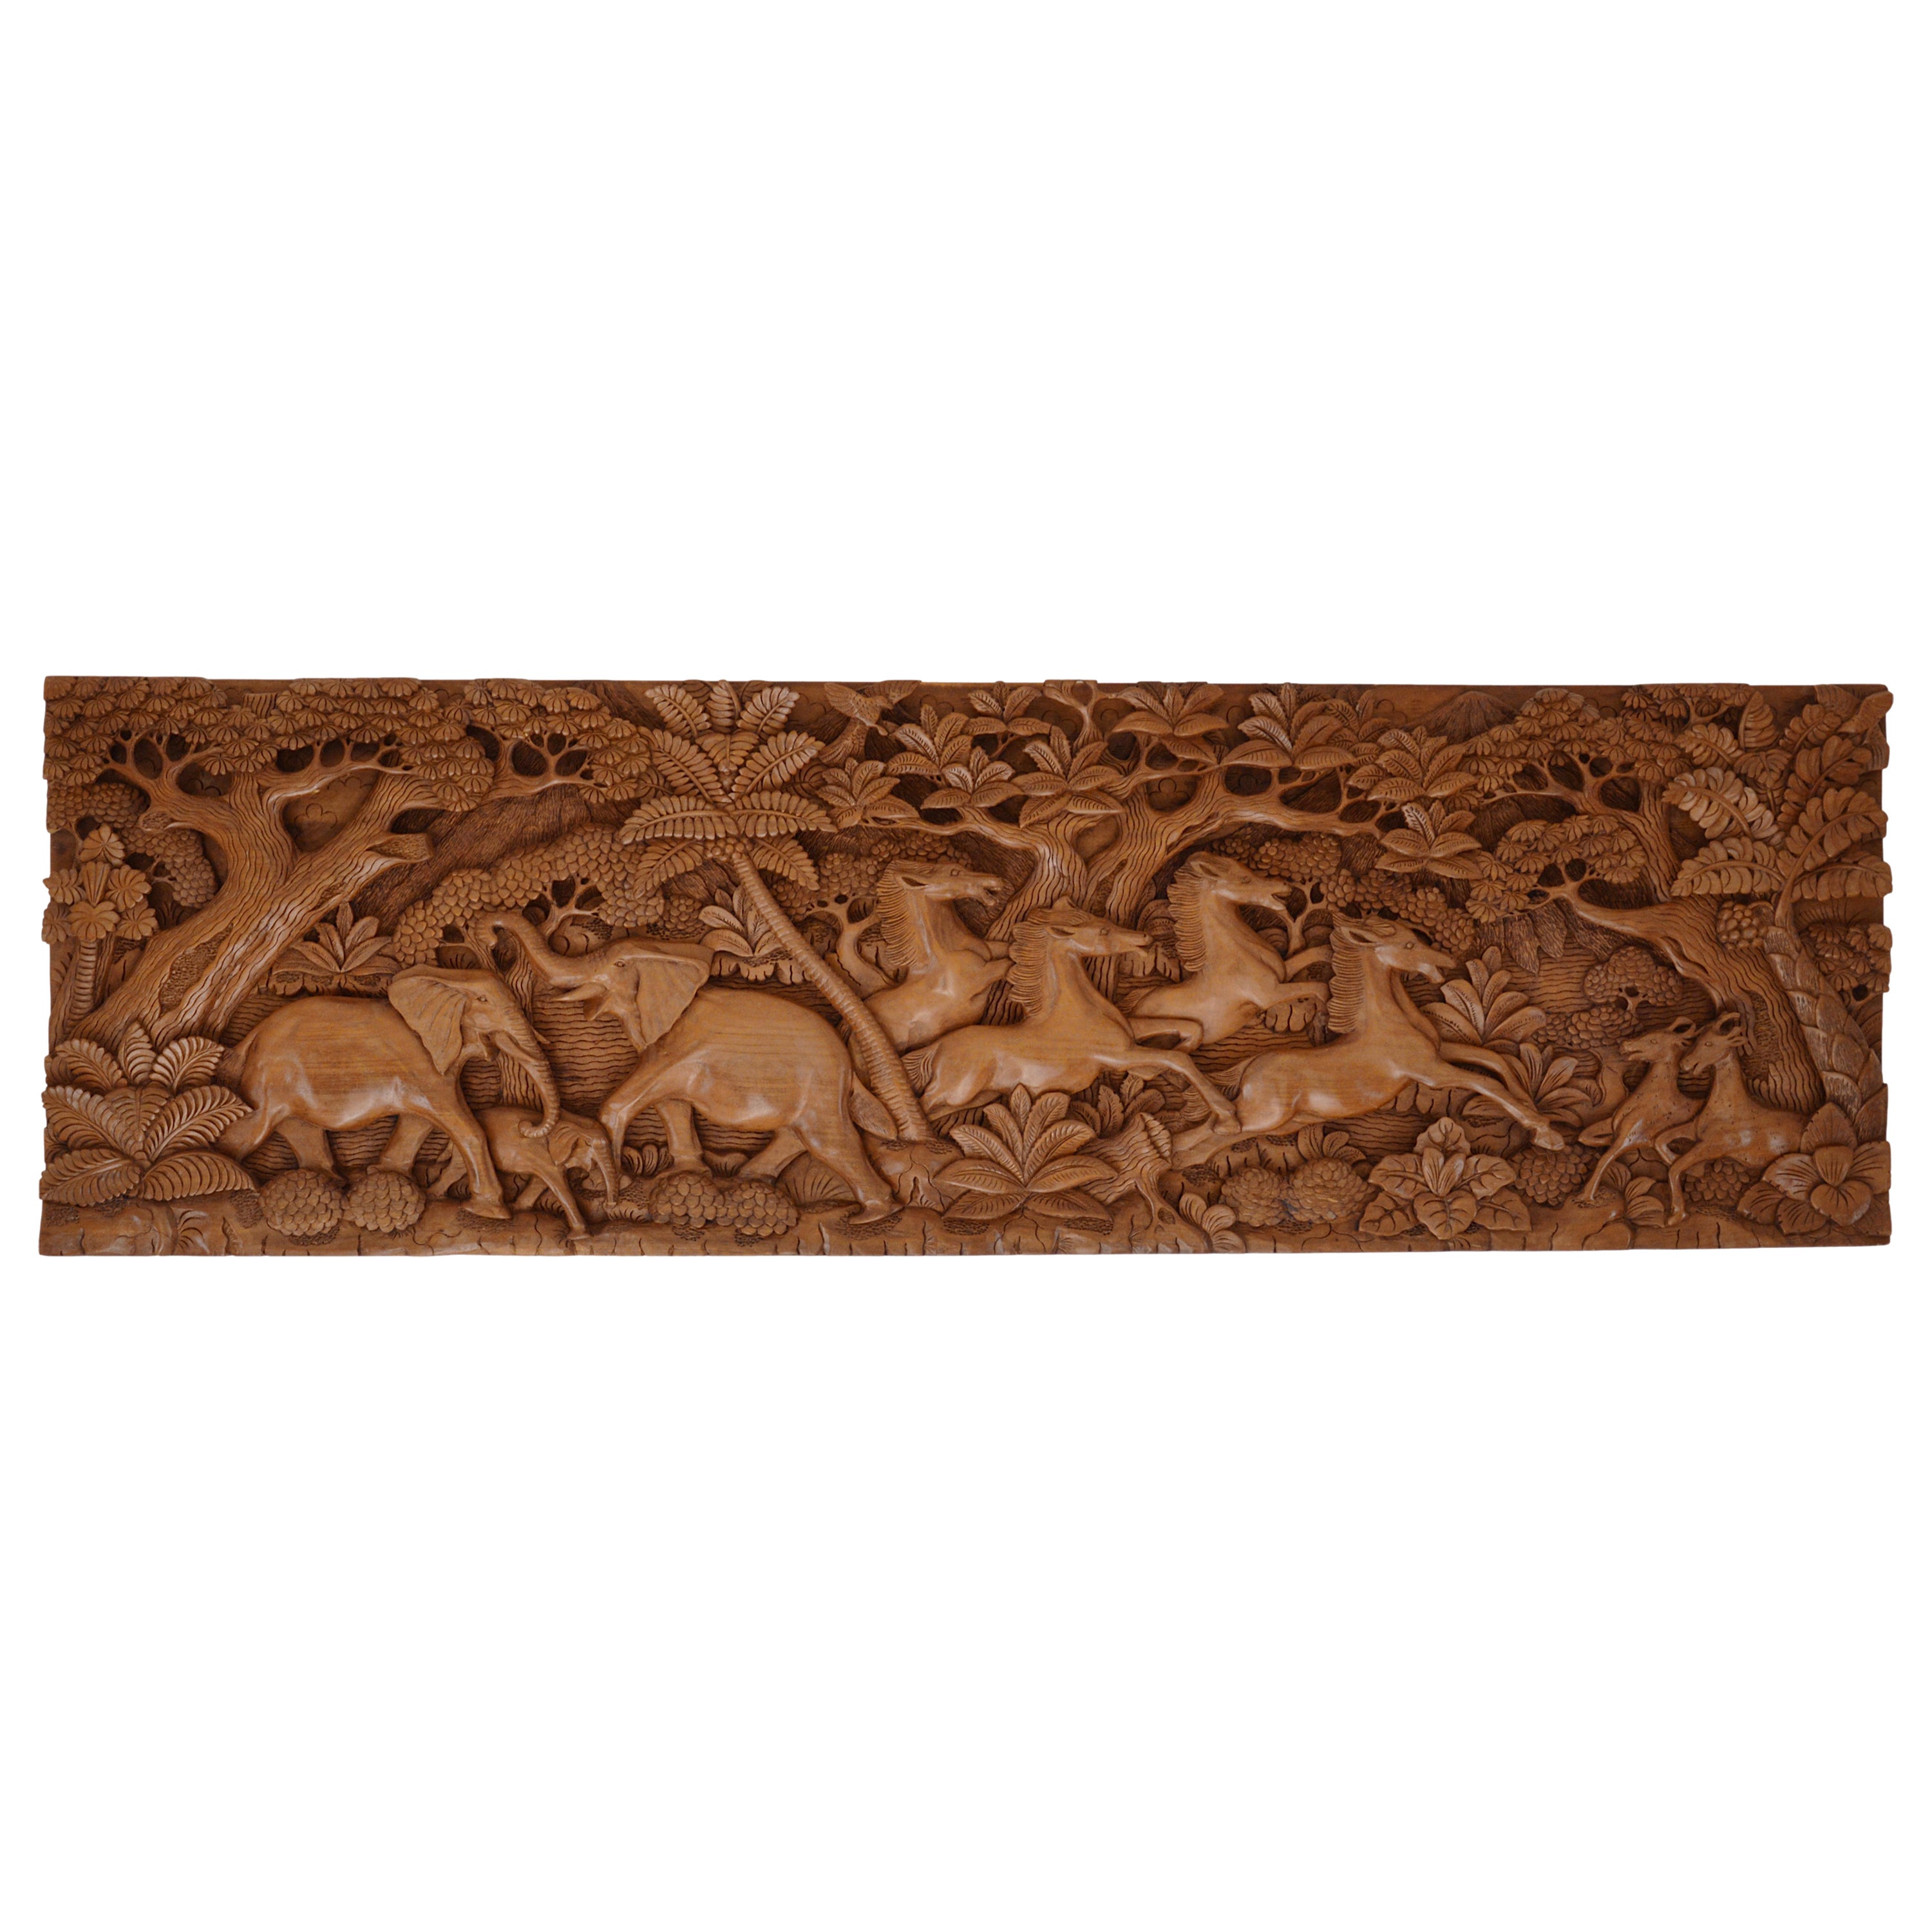 Large Bas-Relief with Exotic Animals and Forest, 1950s-1960s For Sale